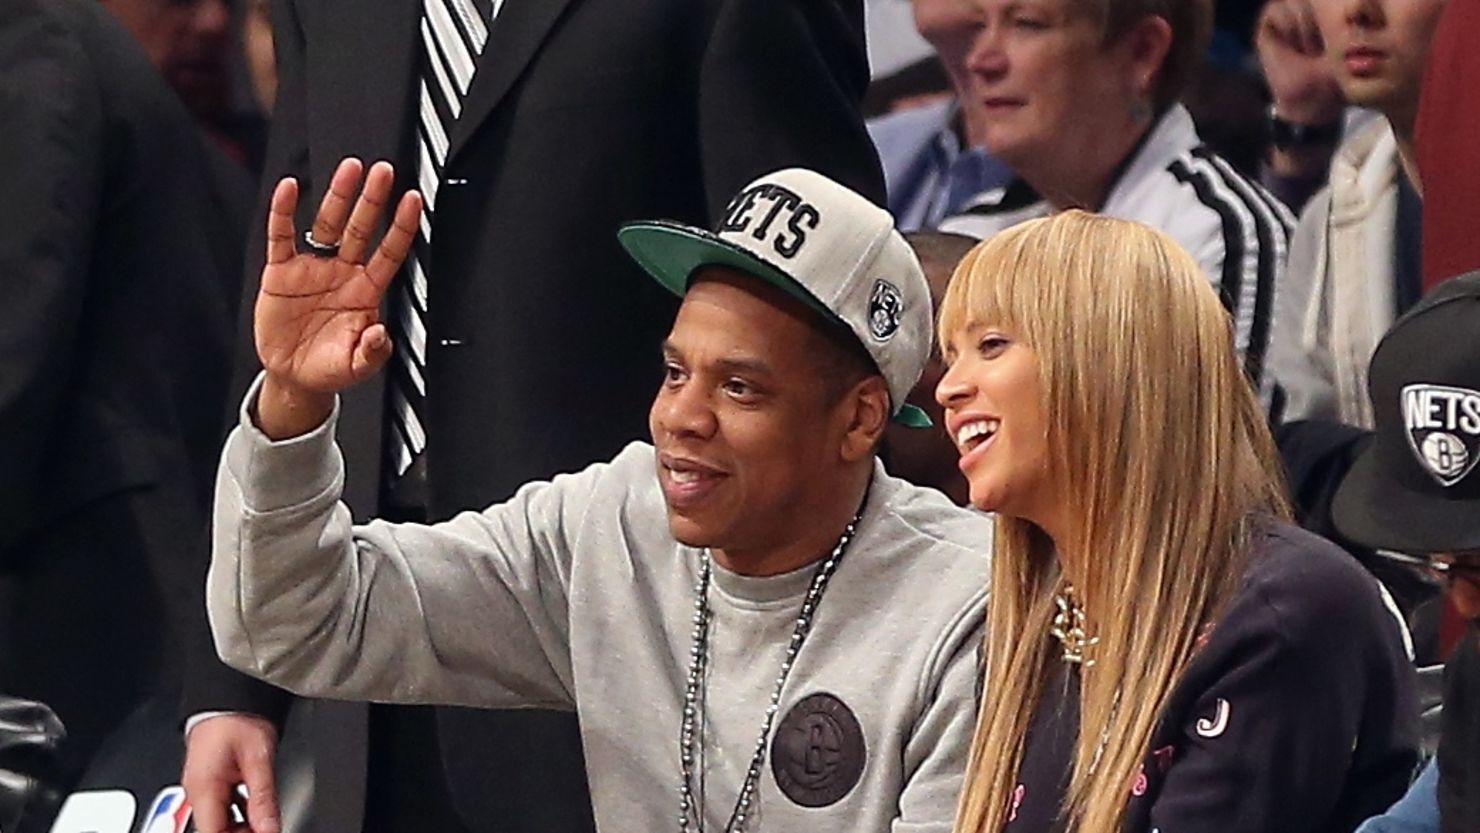 Jay Z and Beyonce attend a Nets game at the Barclays Center.